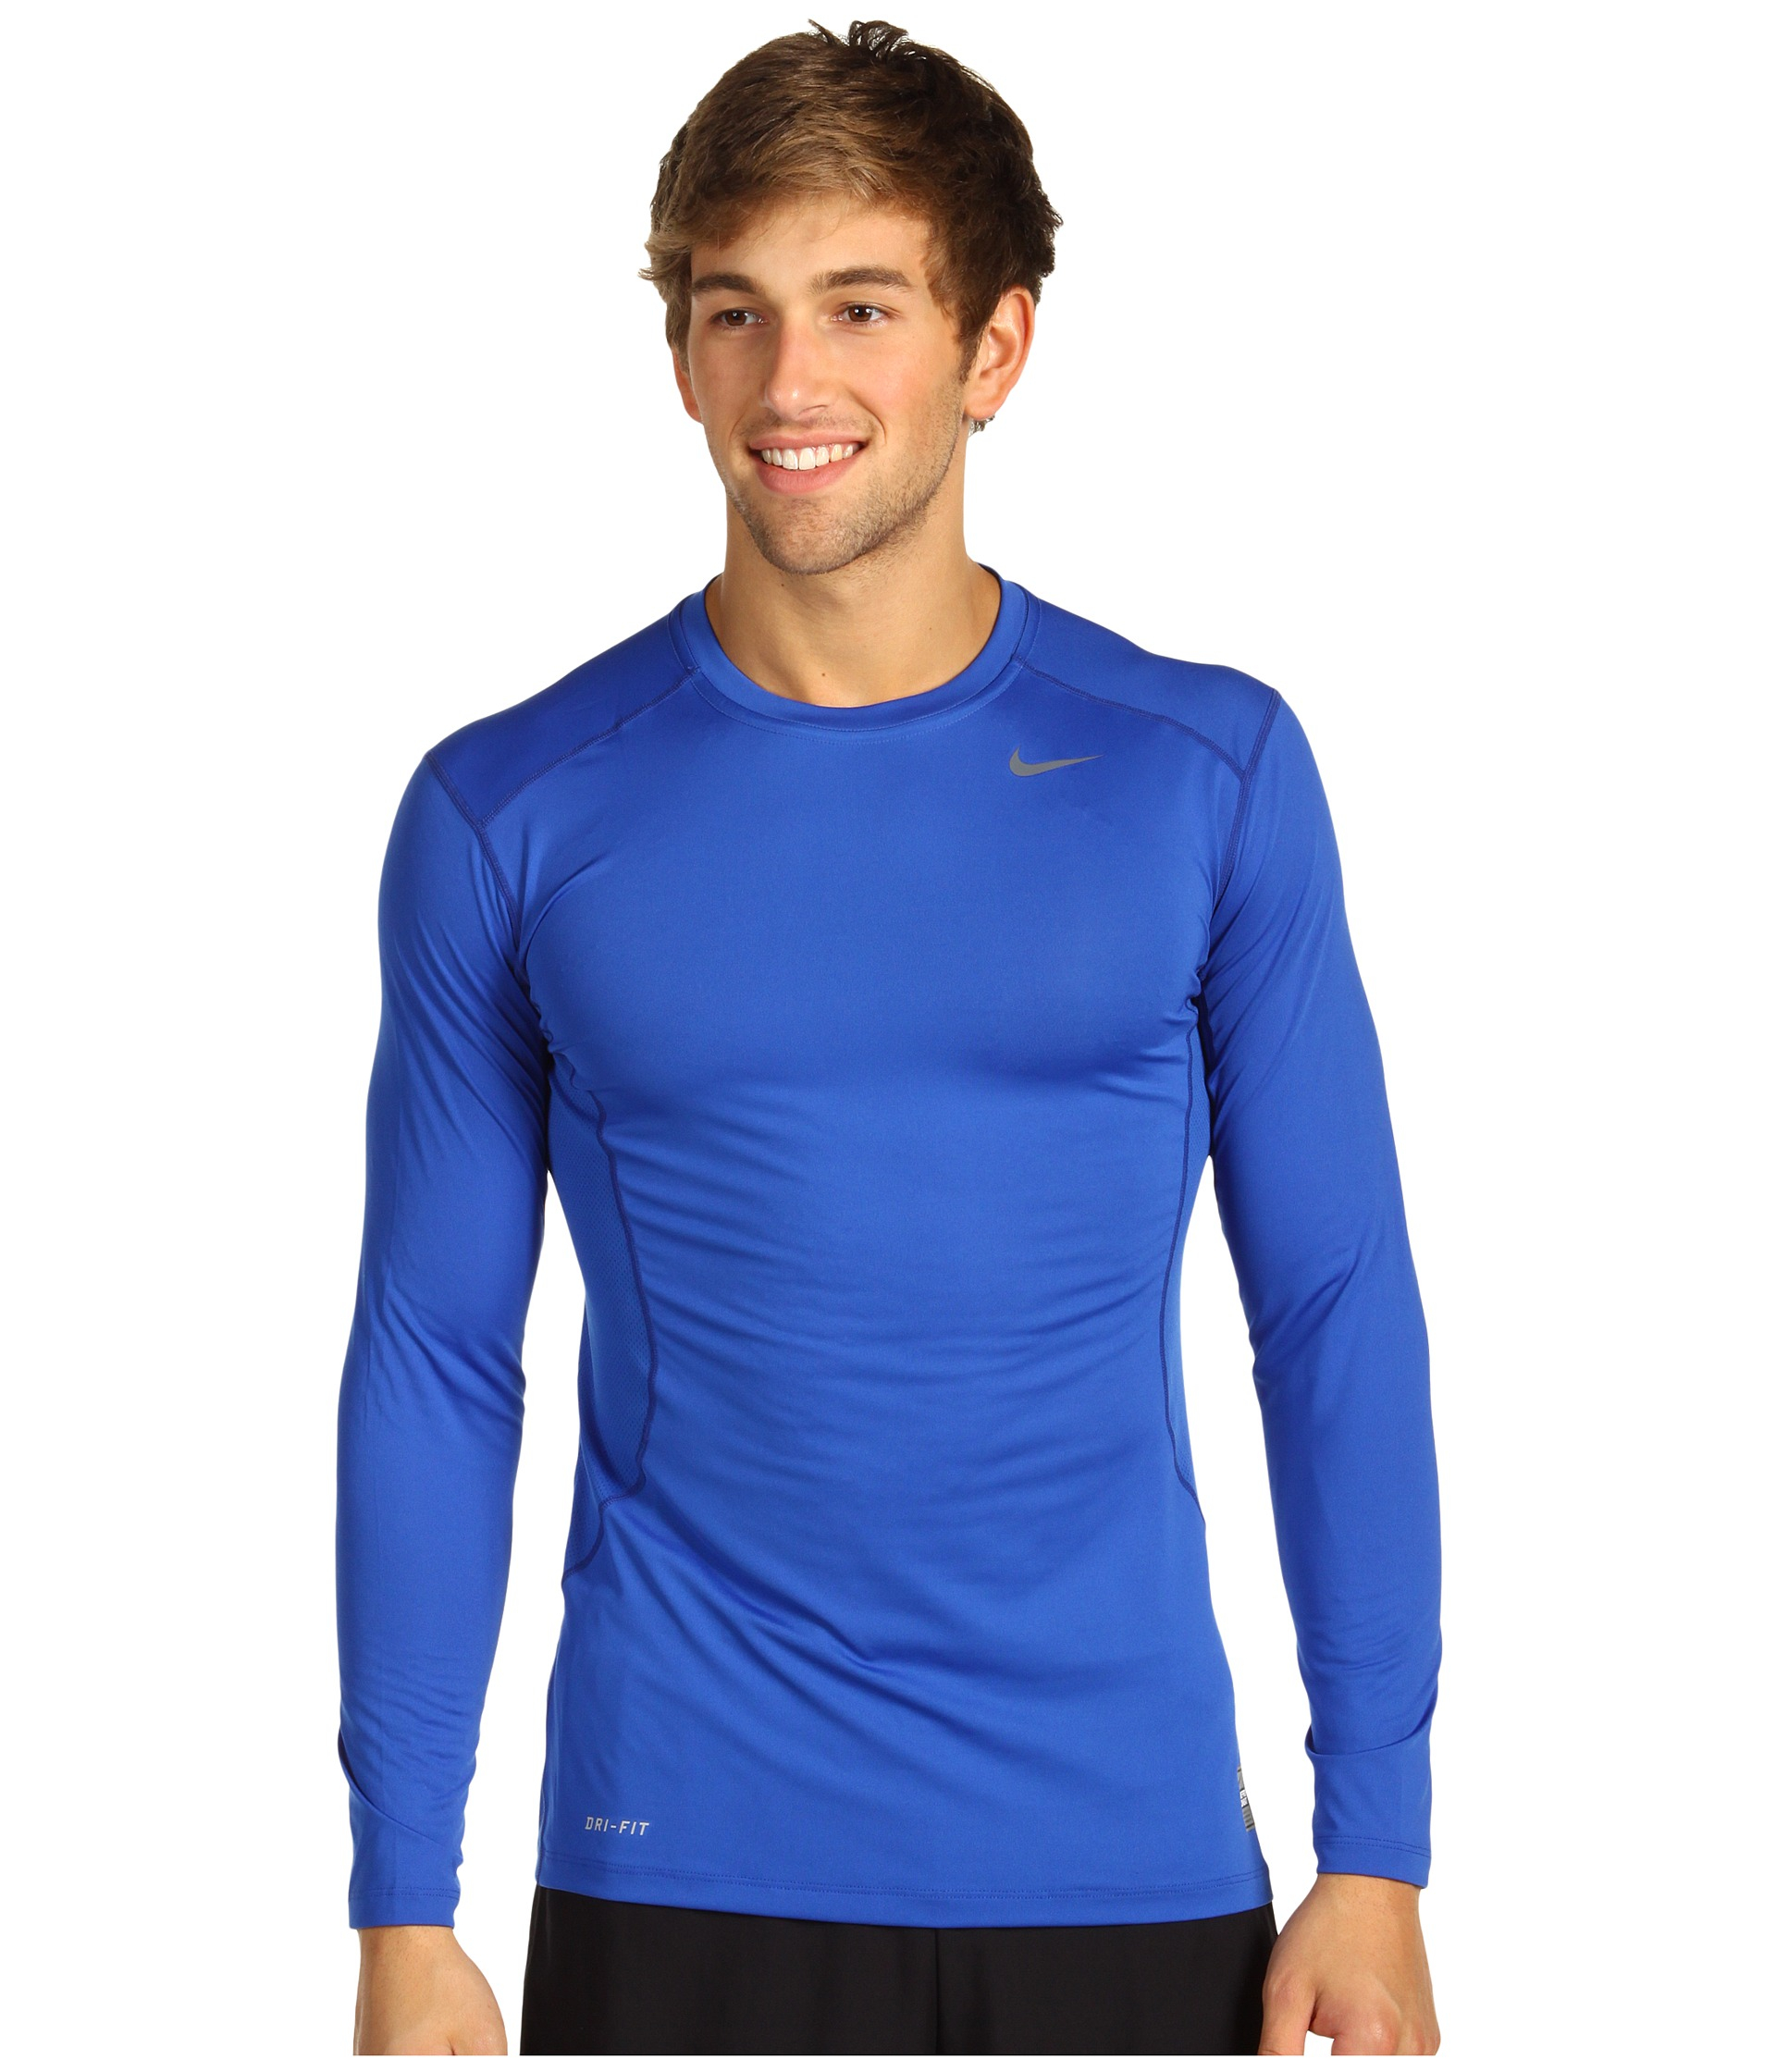 Nike Pro Core Fitted Long Sleeve Top 2.0 in Blue for Men - Lyst